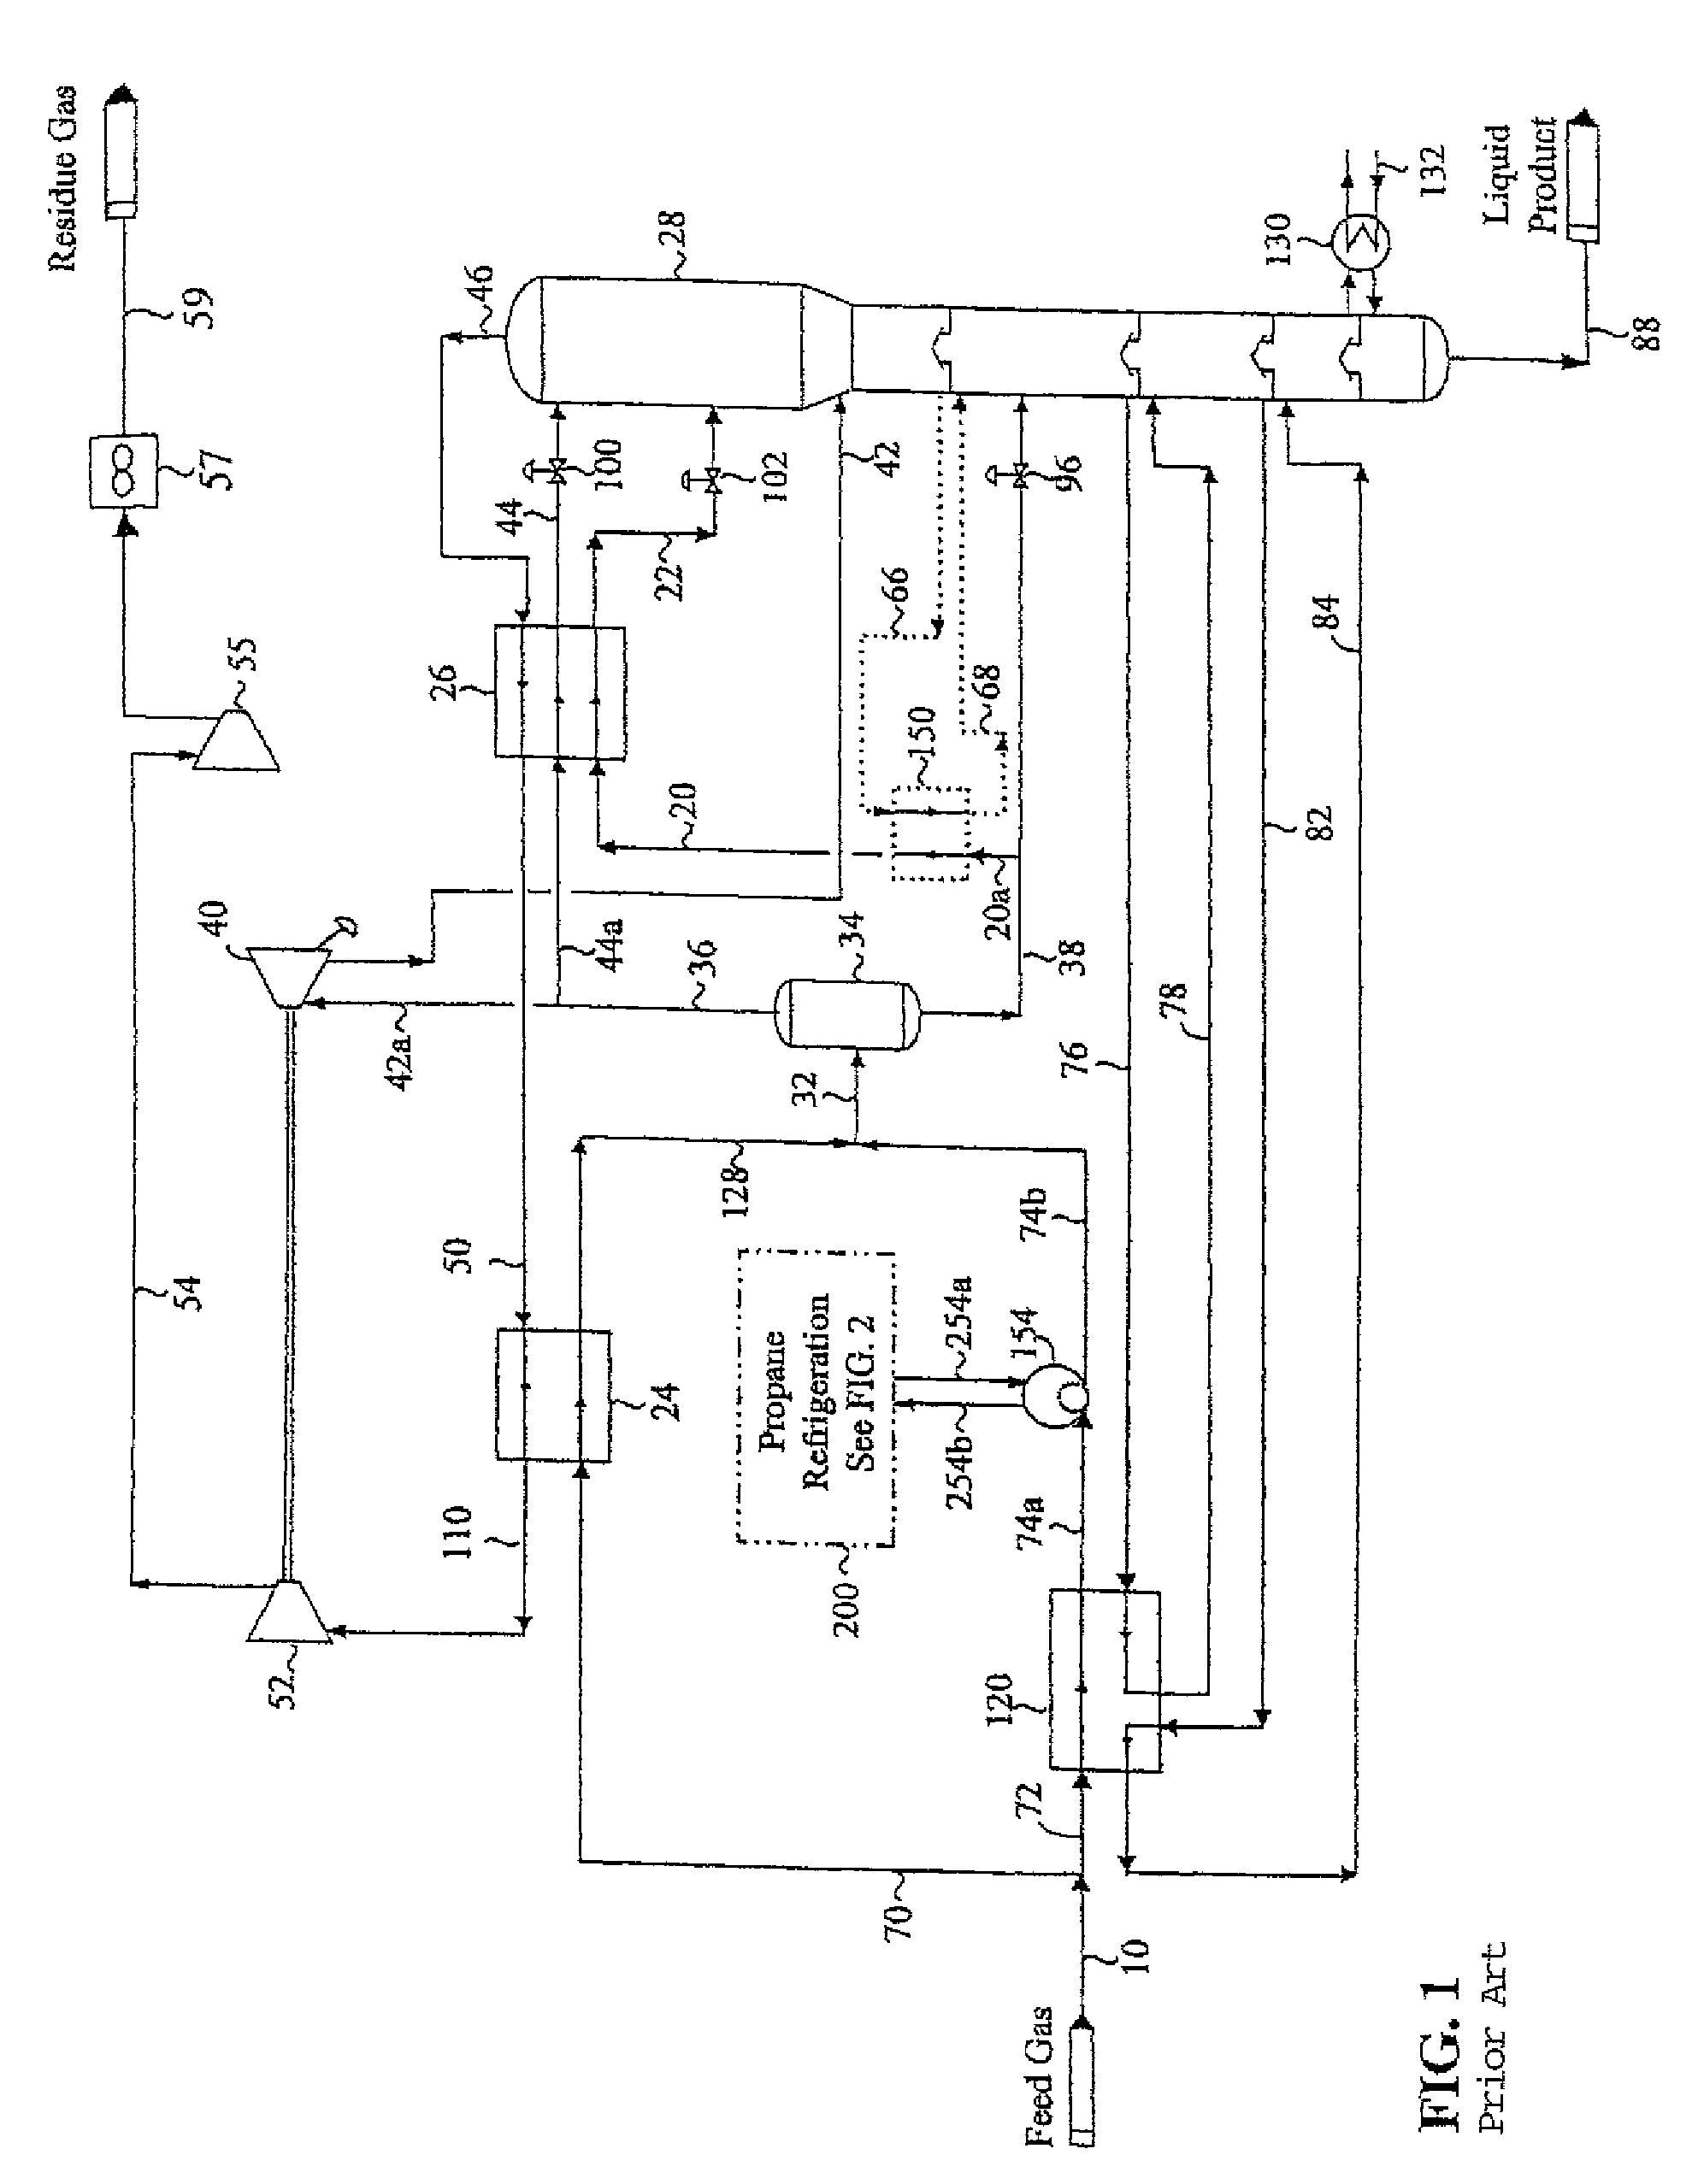 Internal refrigeration for enhanced NGL recovery